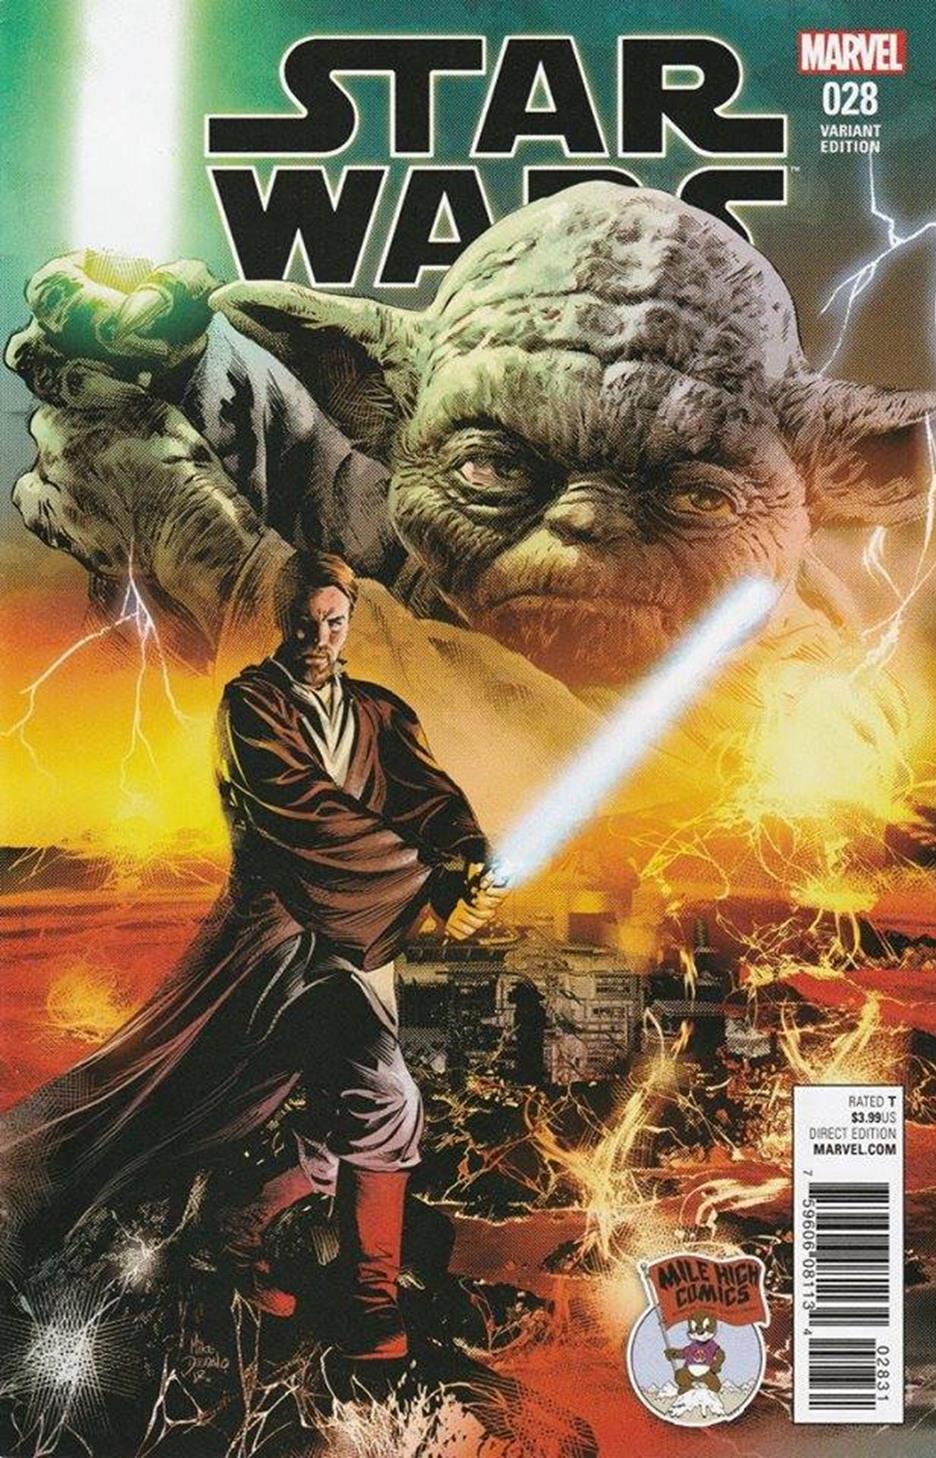 Star Wars #28 (Mike Deodato Mile High Comics Variant Cover) (01.02.2017)